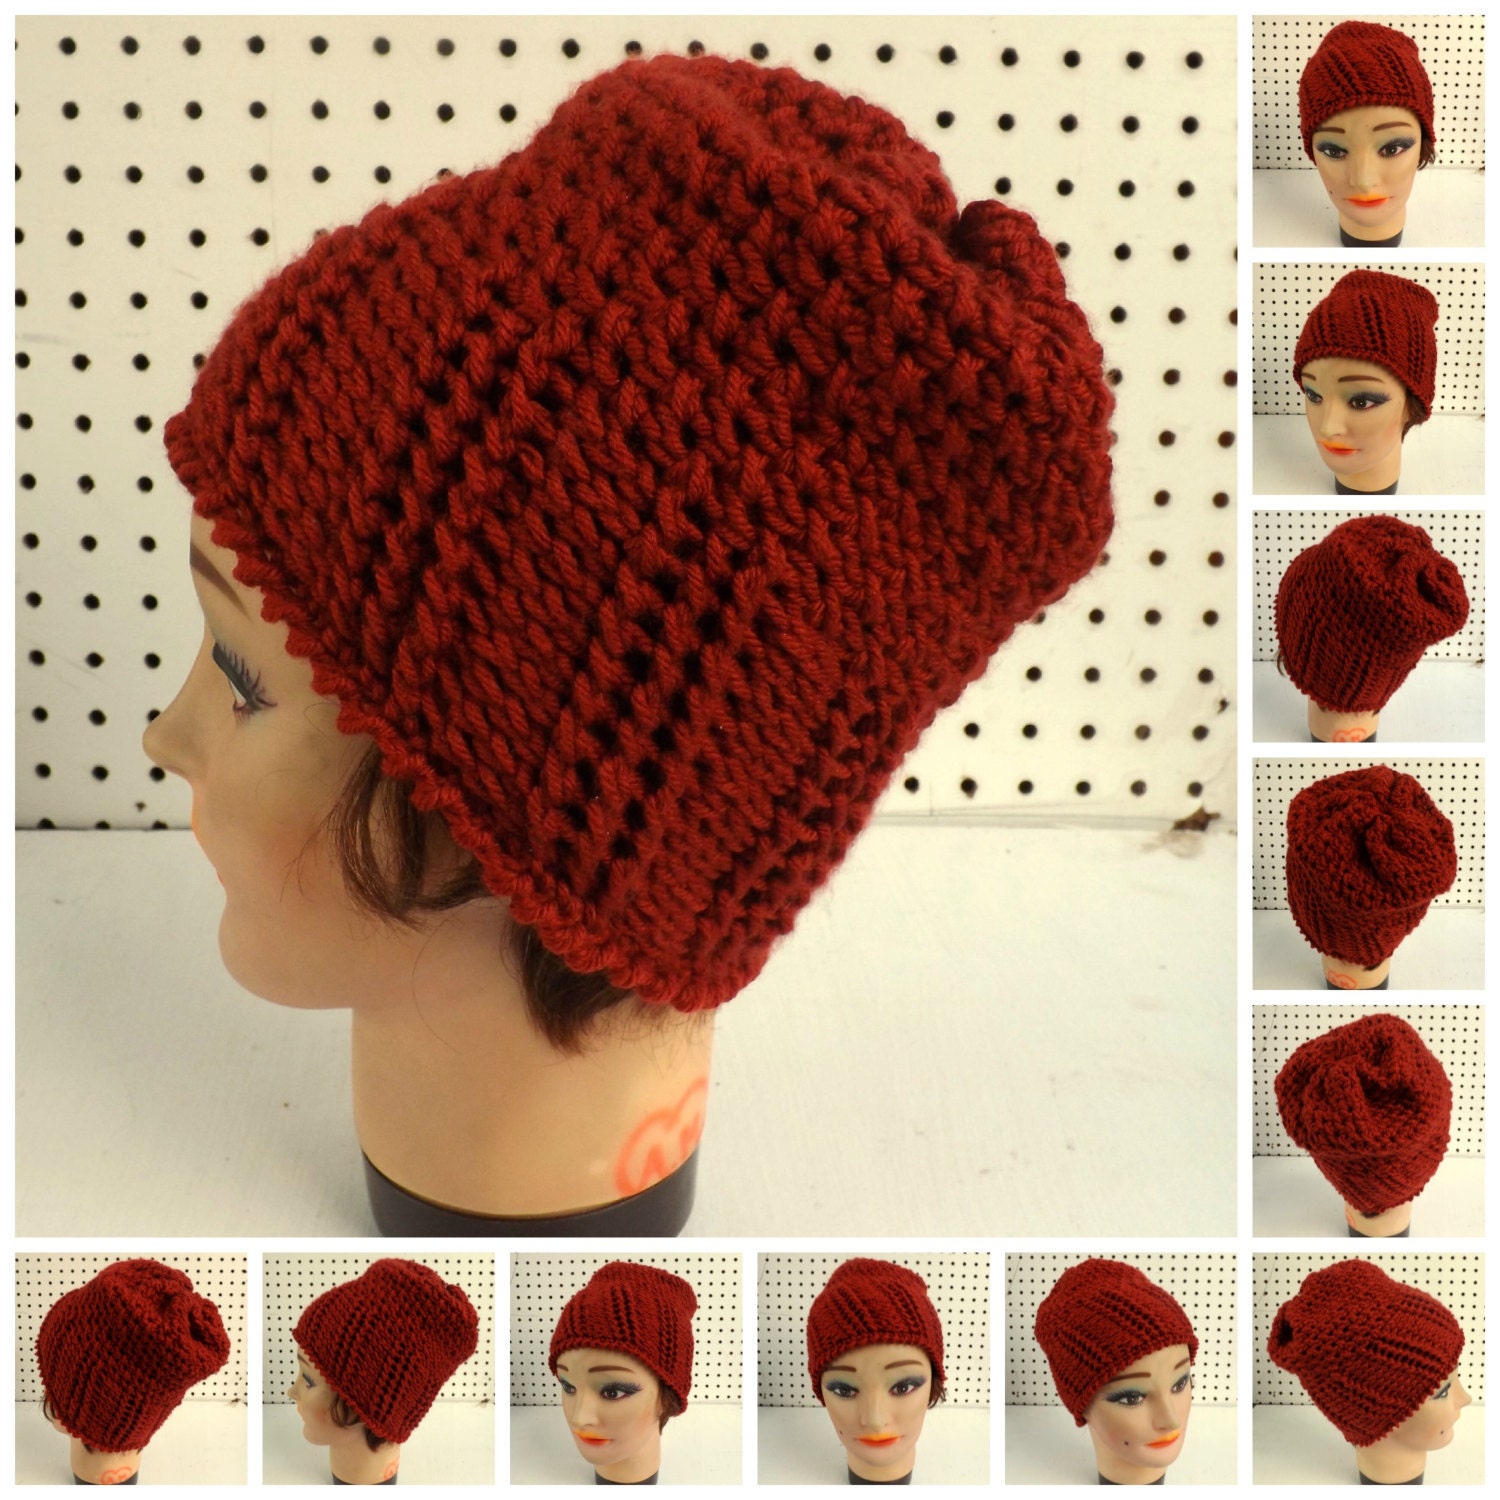 Unique Crochet and Knit Hats and Patterns by StrawberryCouture : 12/01 ...